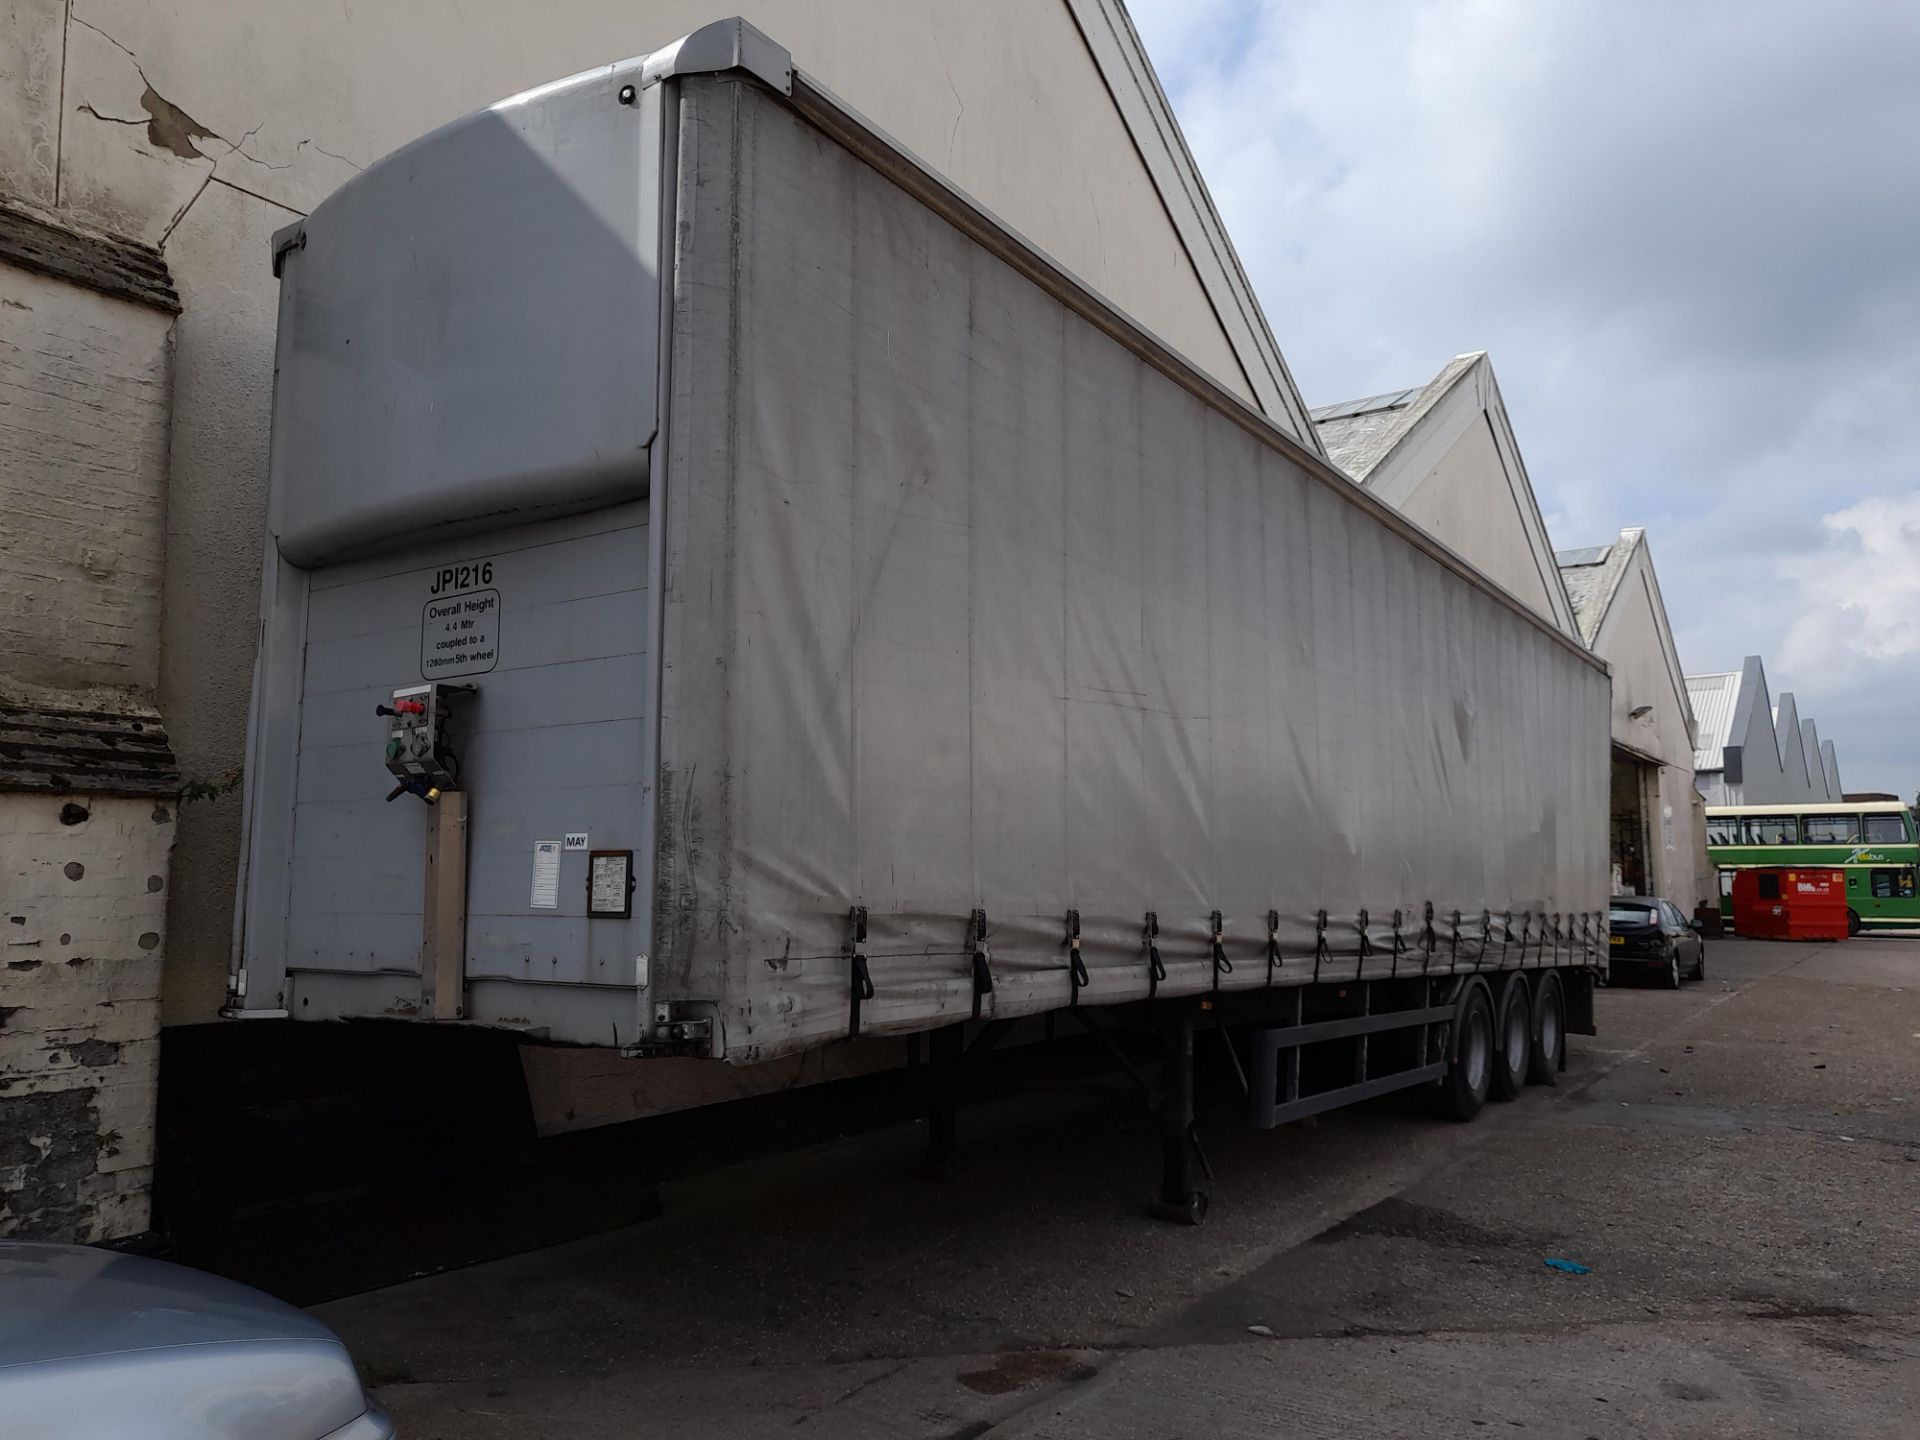 SDC Trailers Tri-Axle Curtain Side Trailer serial number H01100008282 (01/01/05) - Contents included